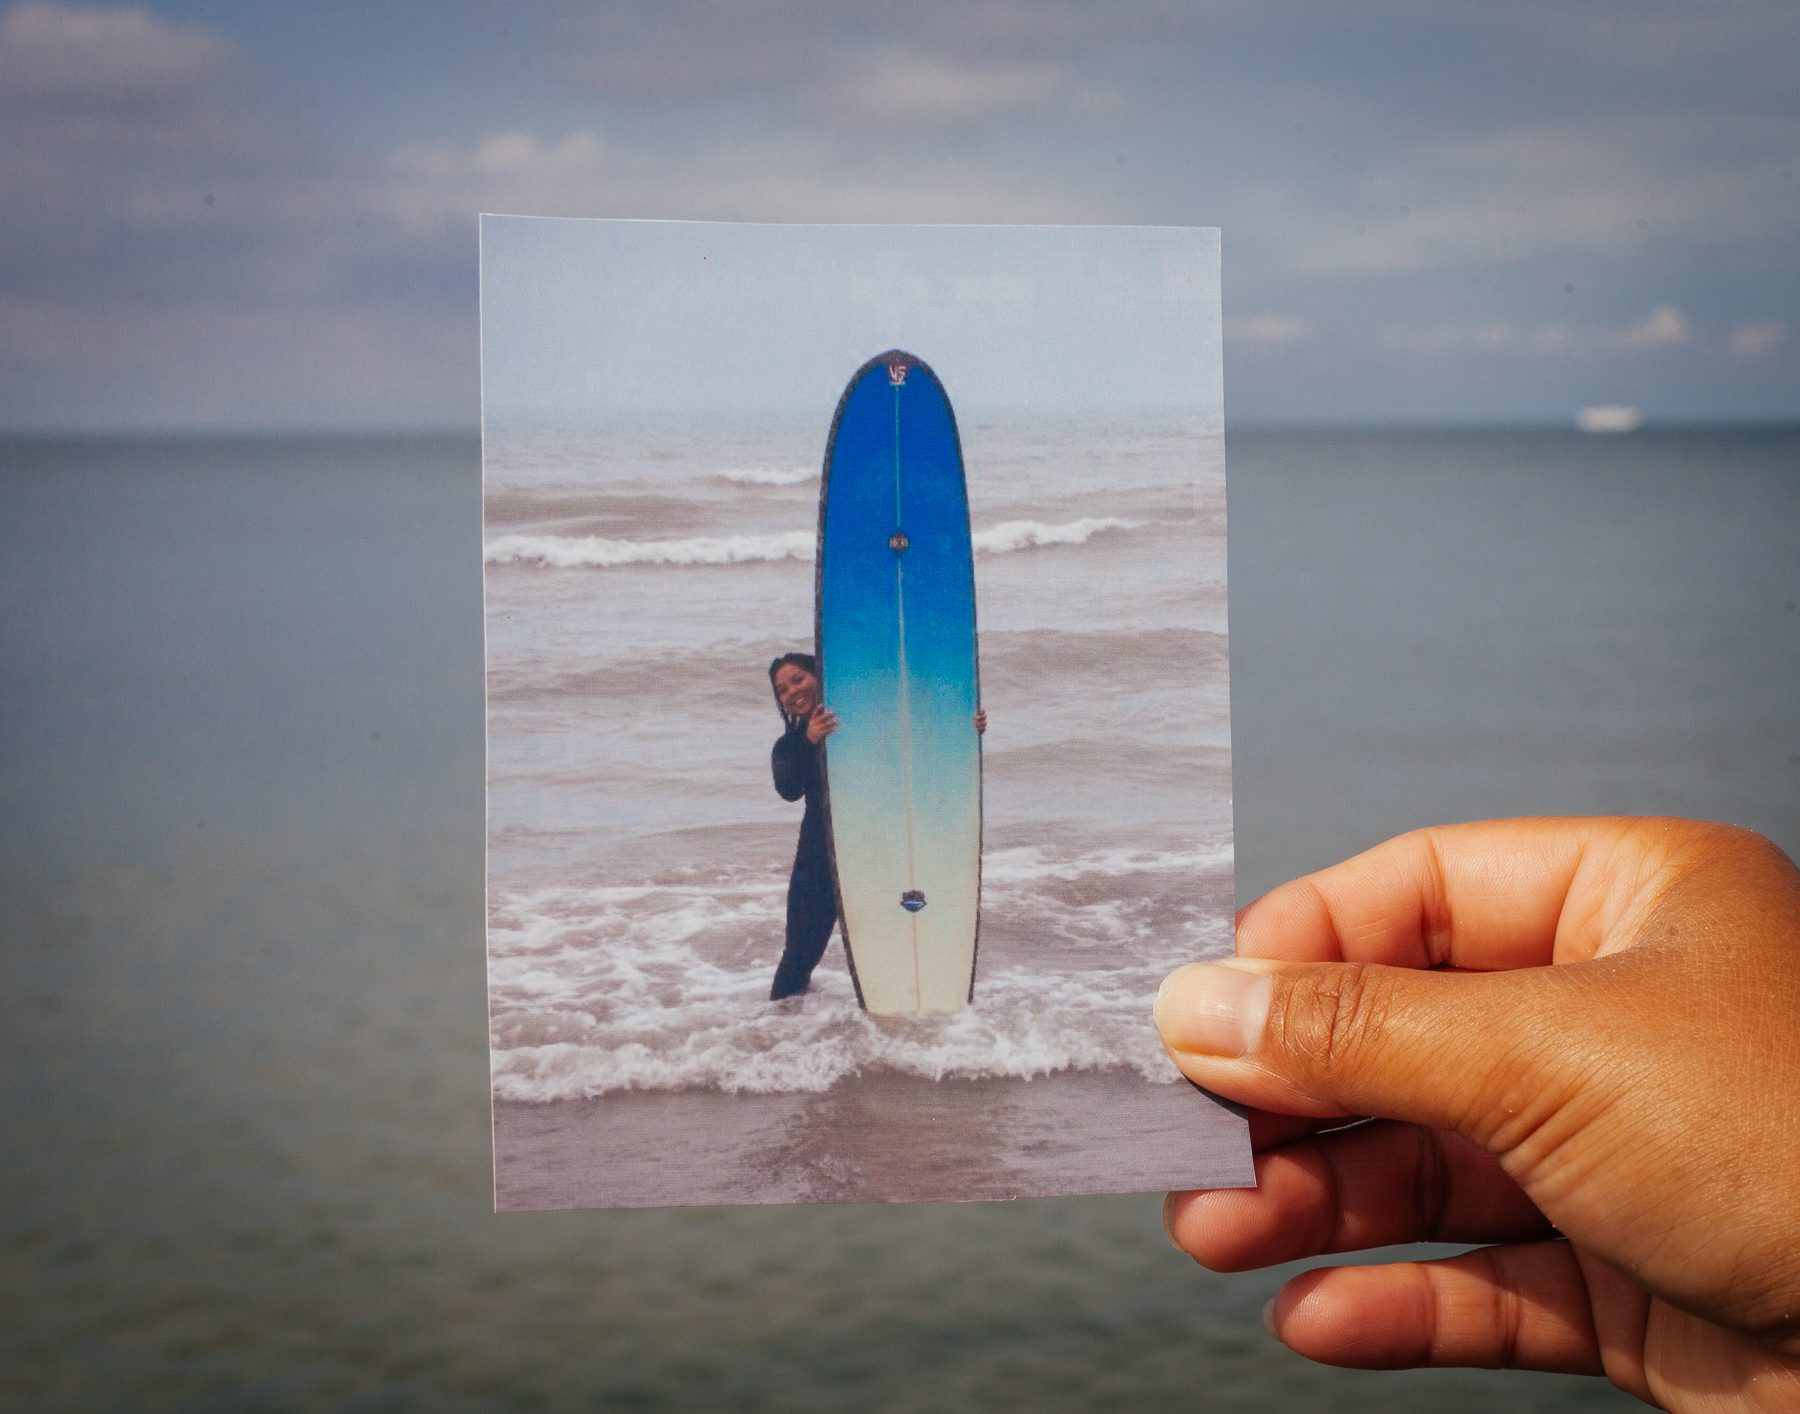 Robin first tried surfing Lake Erie in 2007 at Pleasant Beach — a spot she continues to visit. Robin explains how Lake Erie's northeastern corner is particularly suitable for surfing because of the westerly winds and shallow water. 